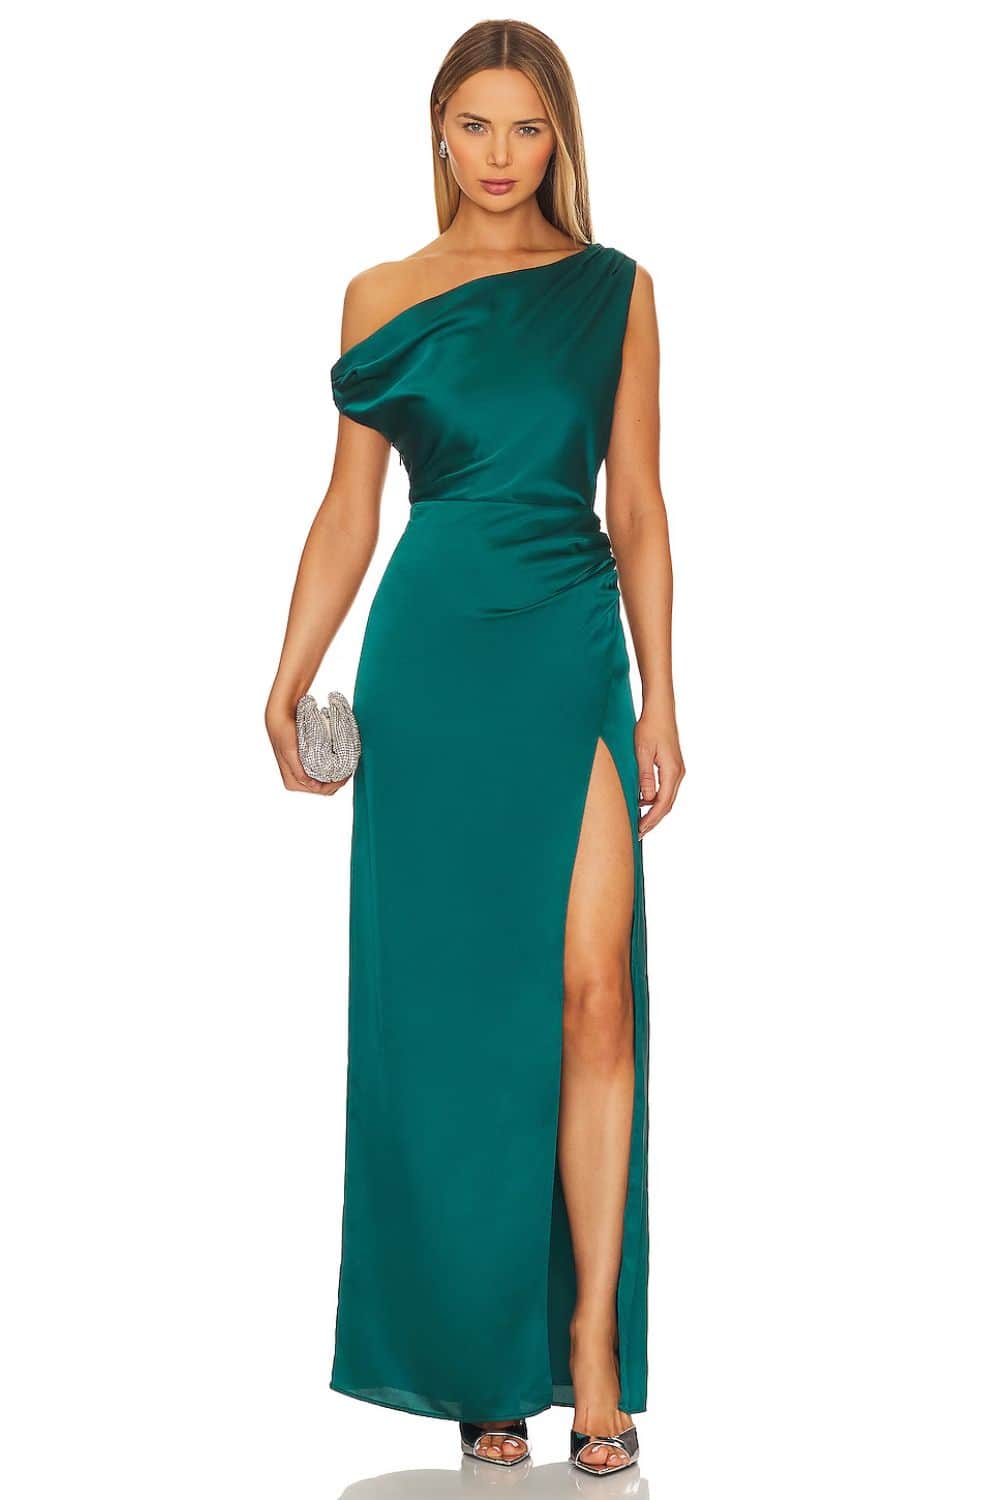 What to wear to opera with Off the Should Satin Dress with High Slit + Heel Sandals + Sparkly Hand Bag